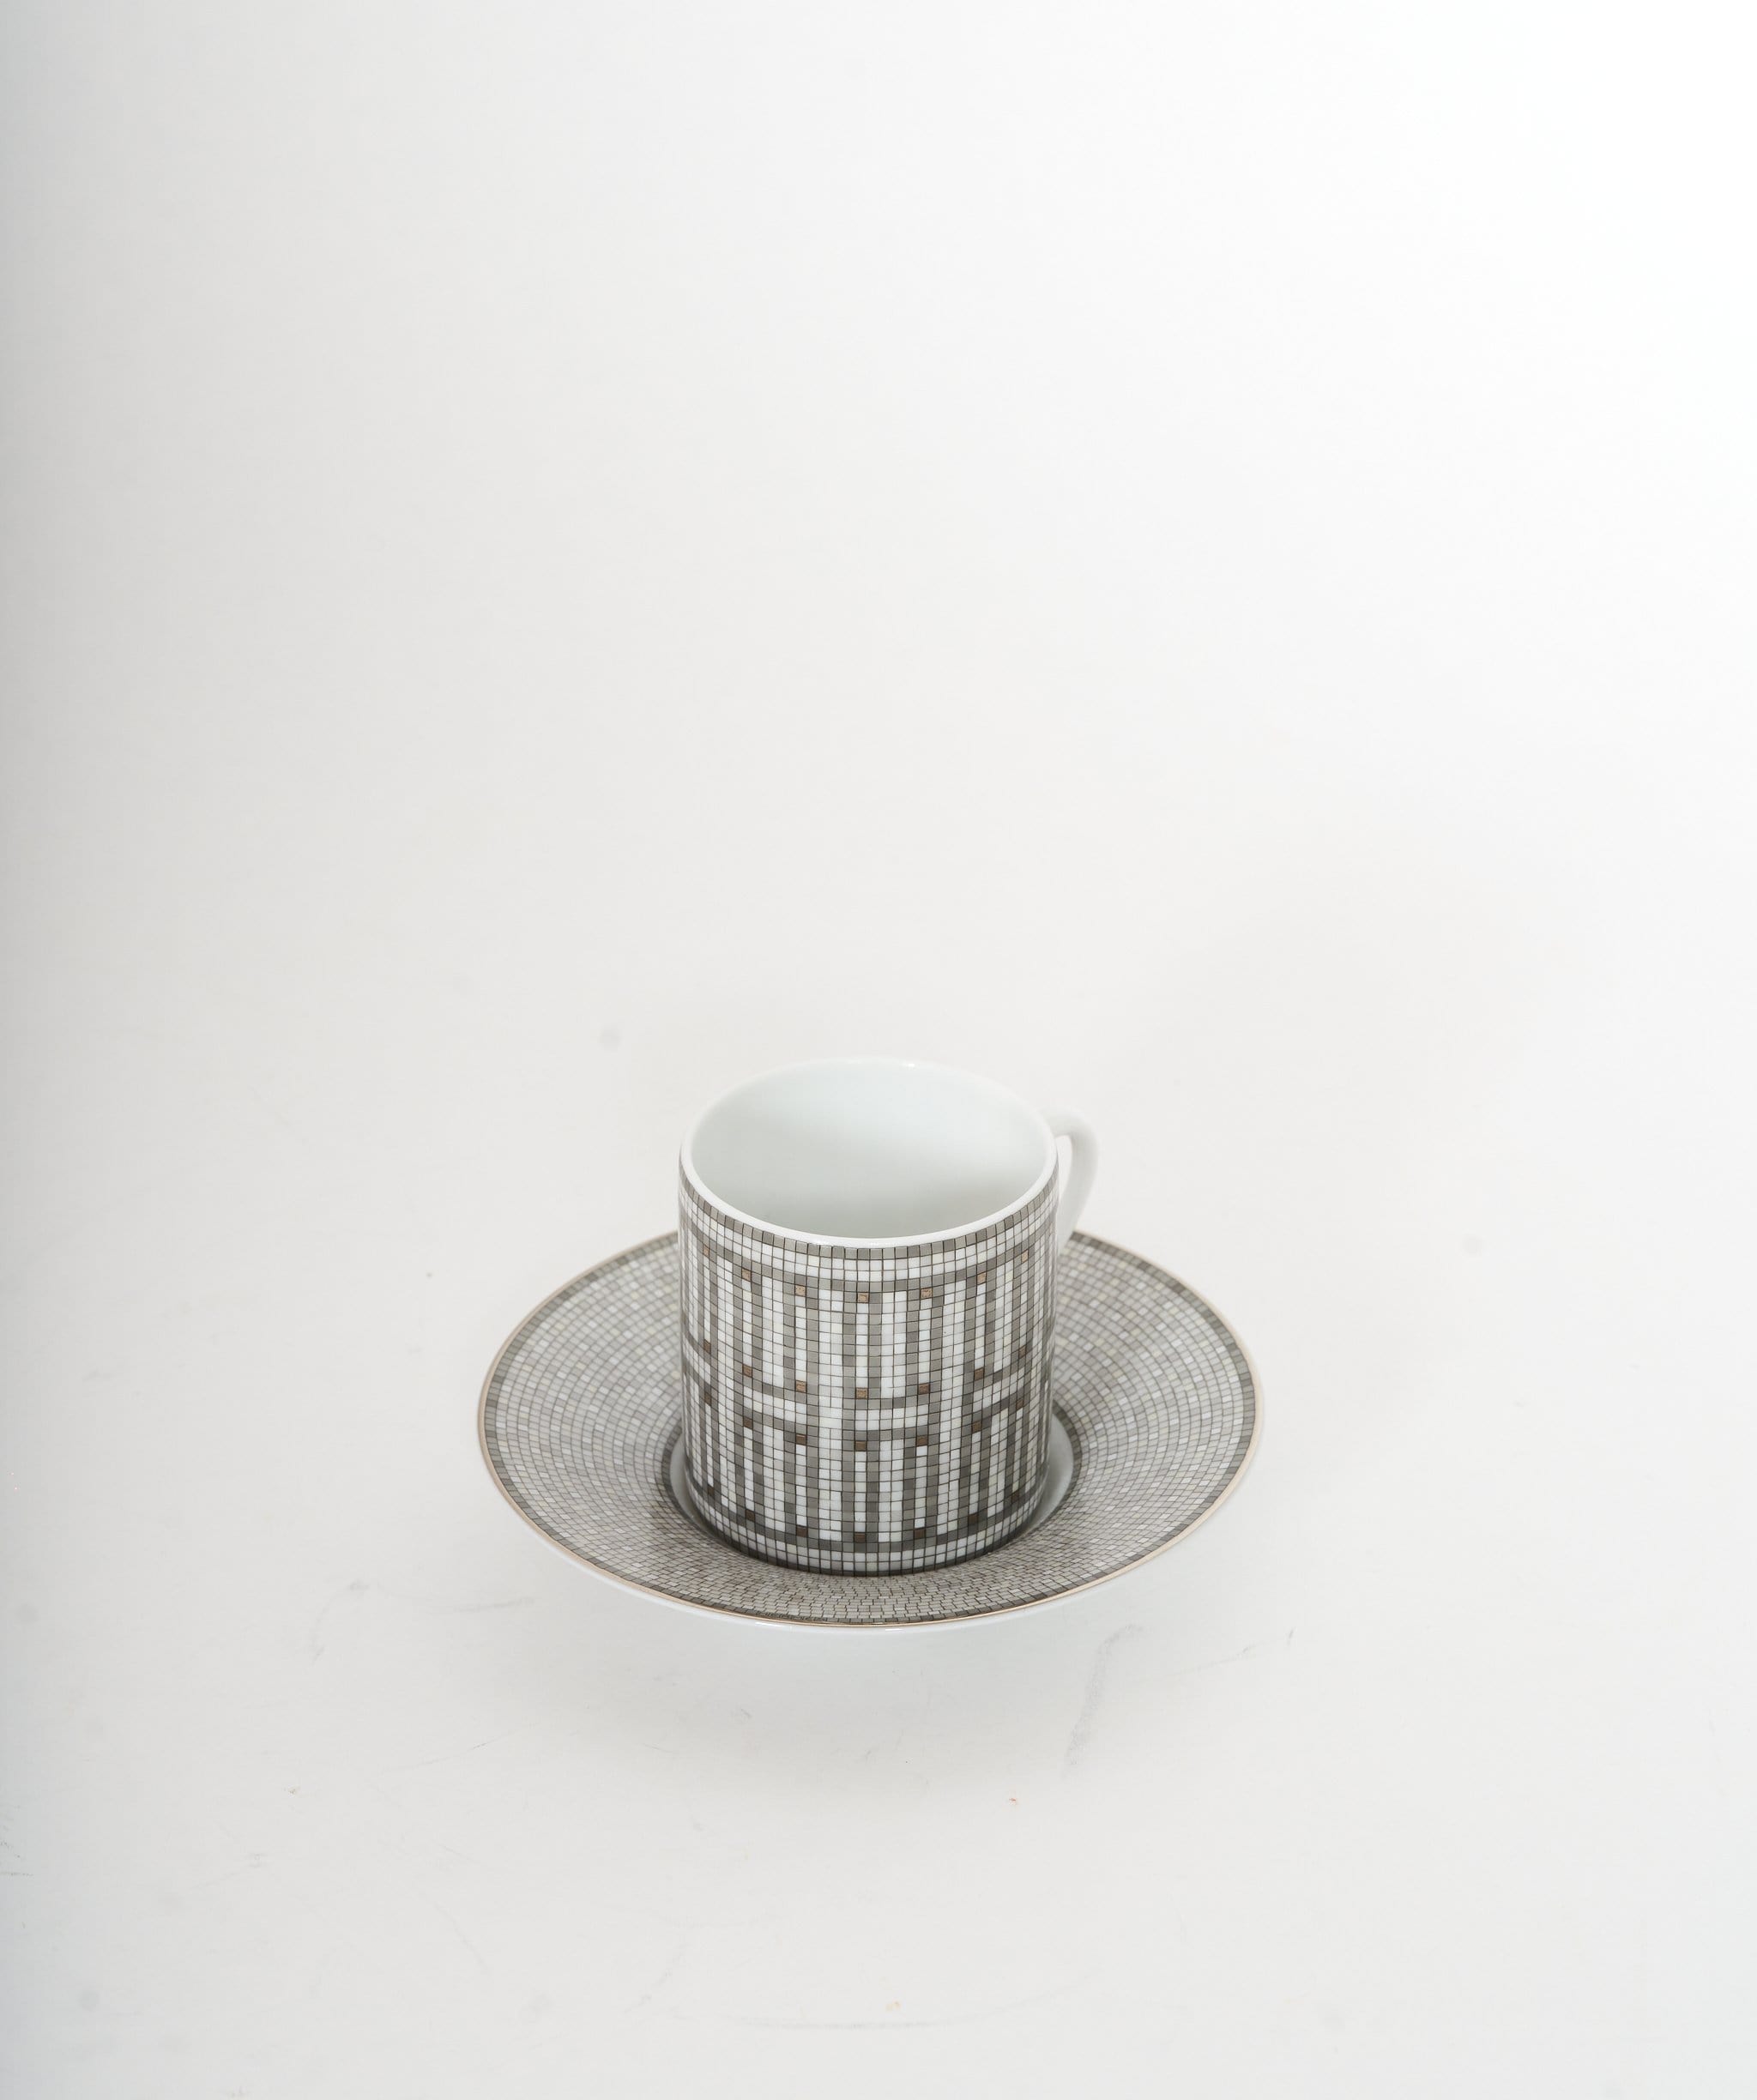 Hermès Hermes silver mosaique single coffee cup and saucer